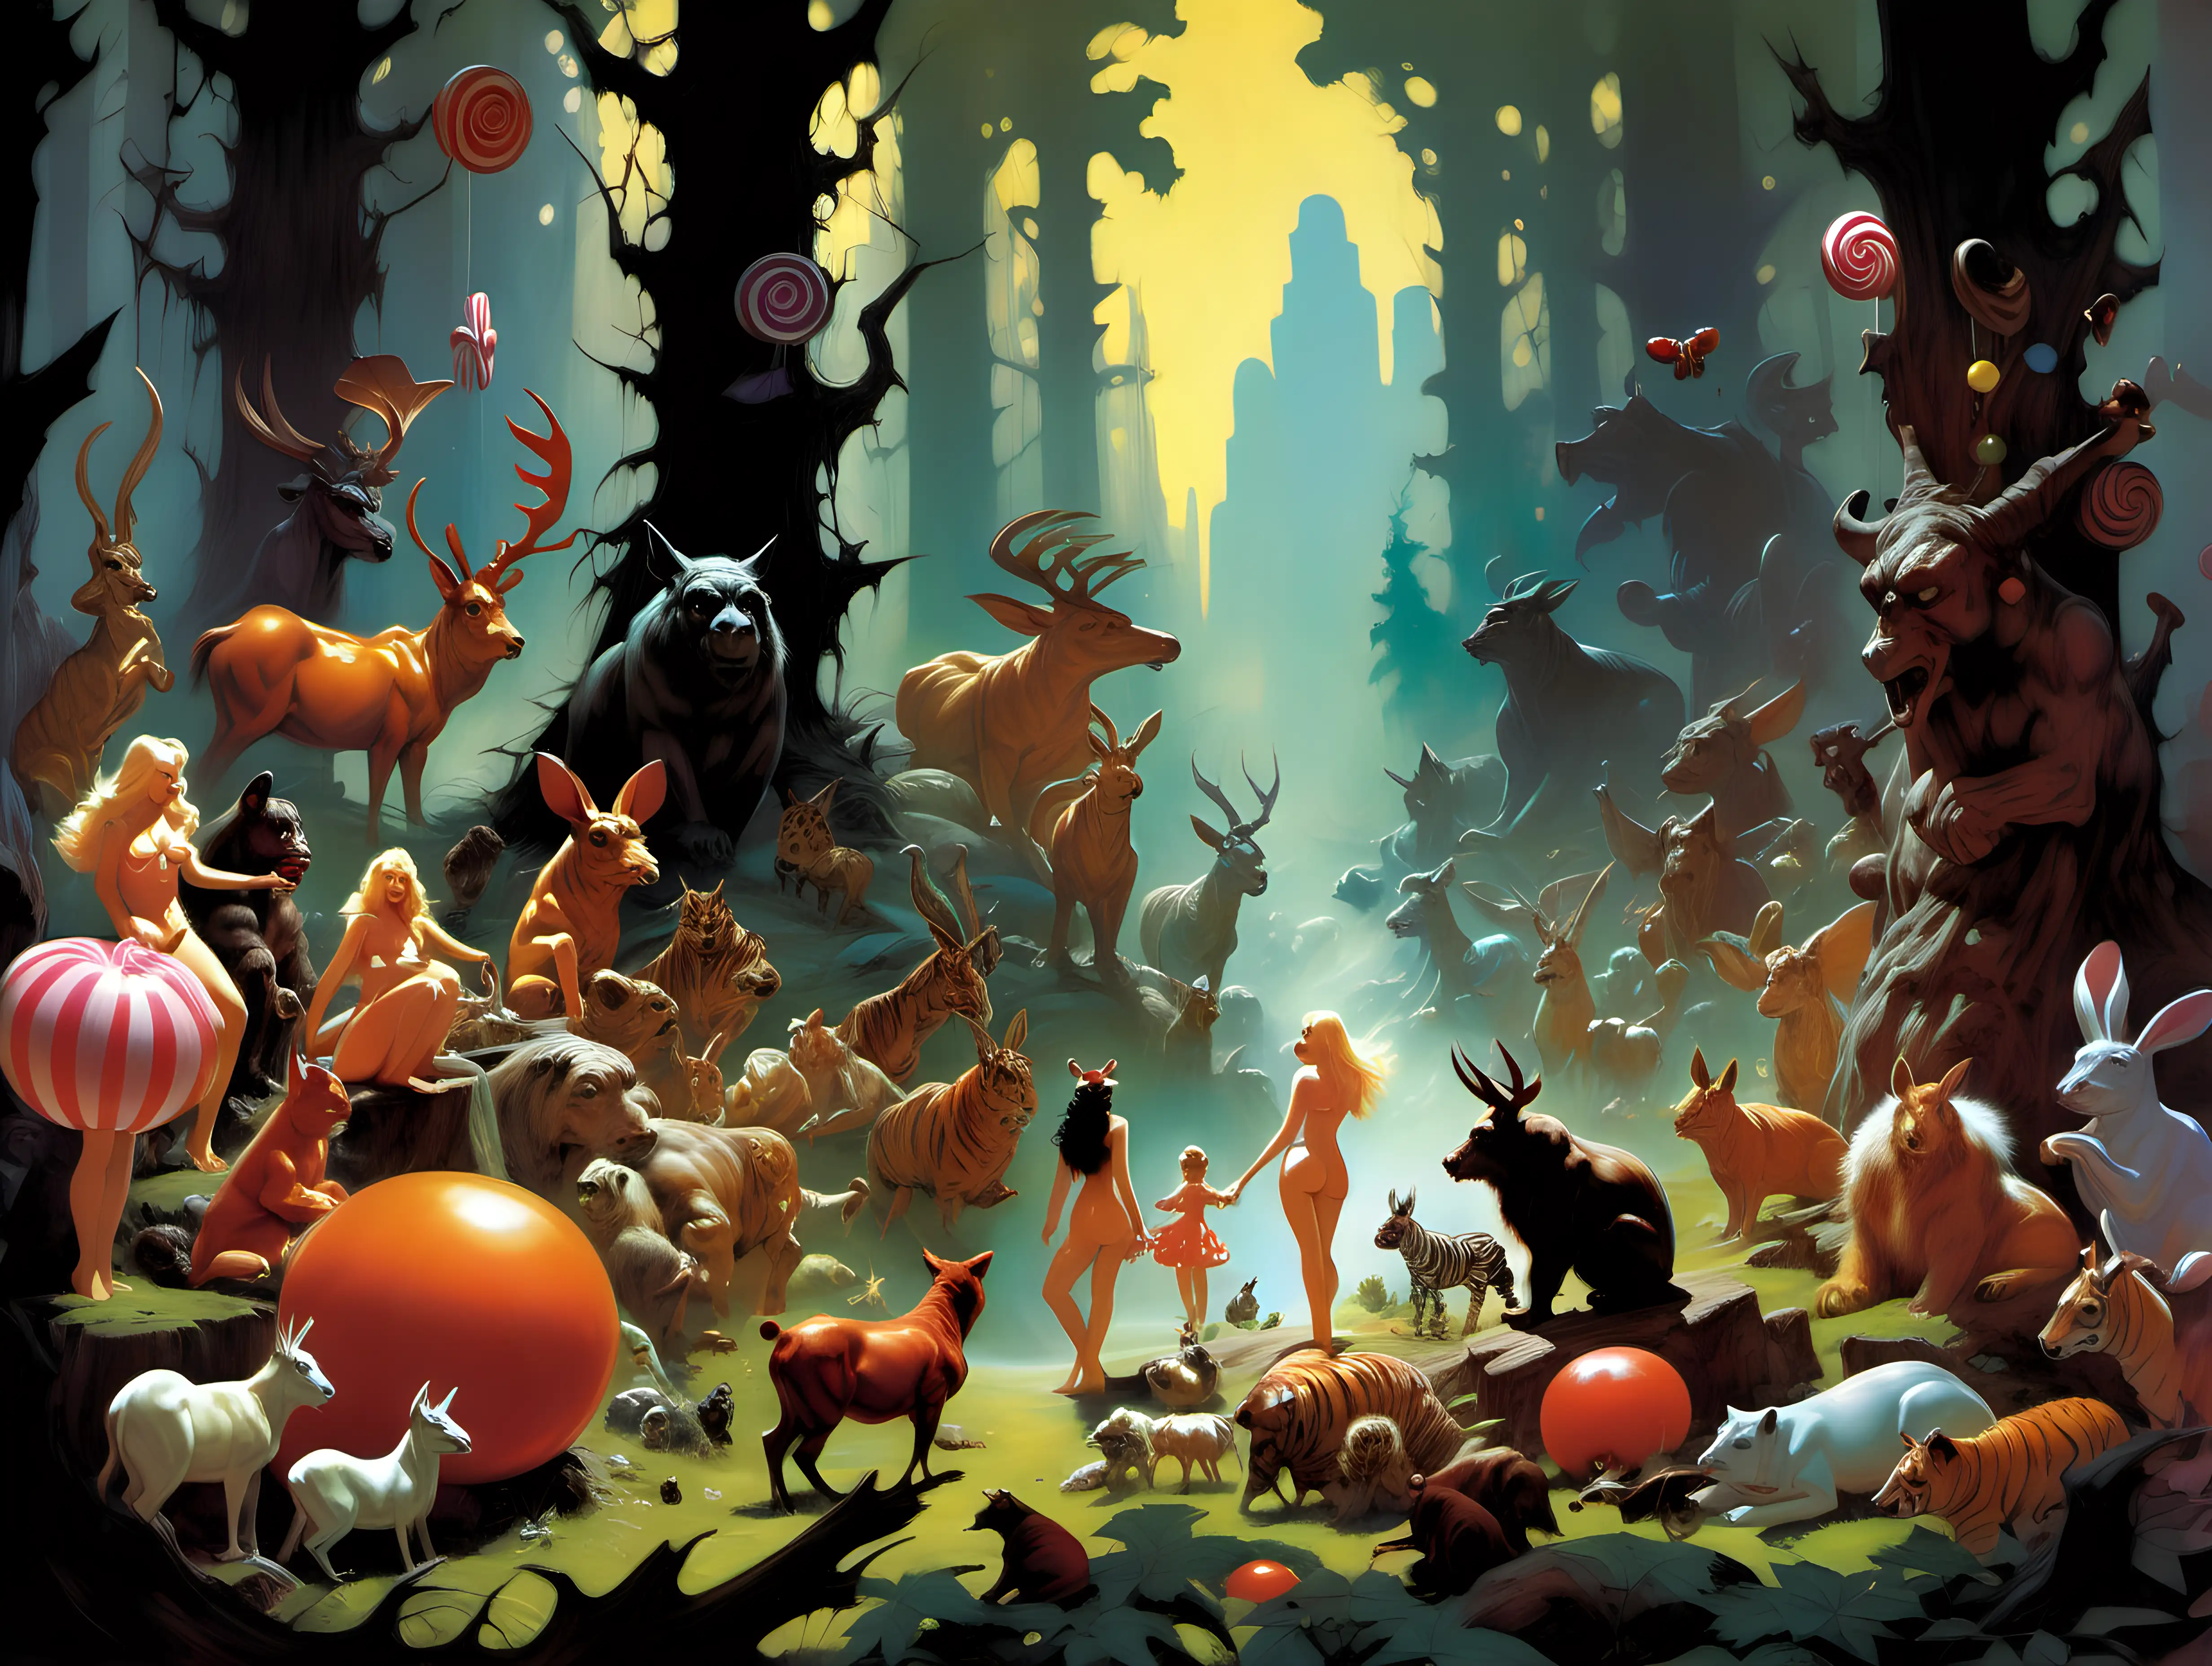 Candy story in the middle of an enchanted forest surrounded by animals Frank Frazetta style